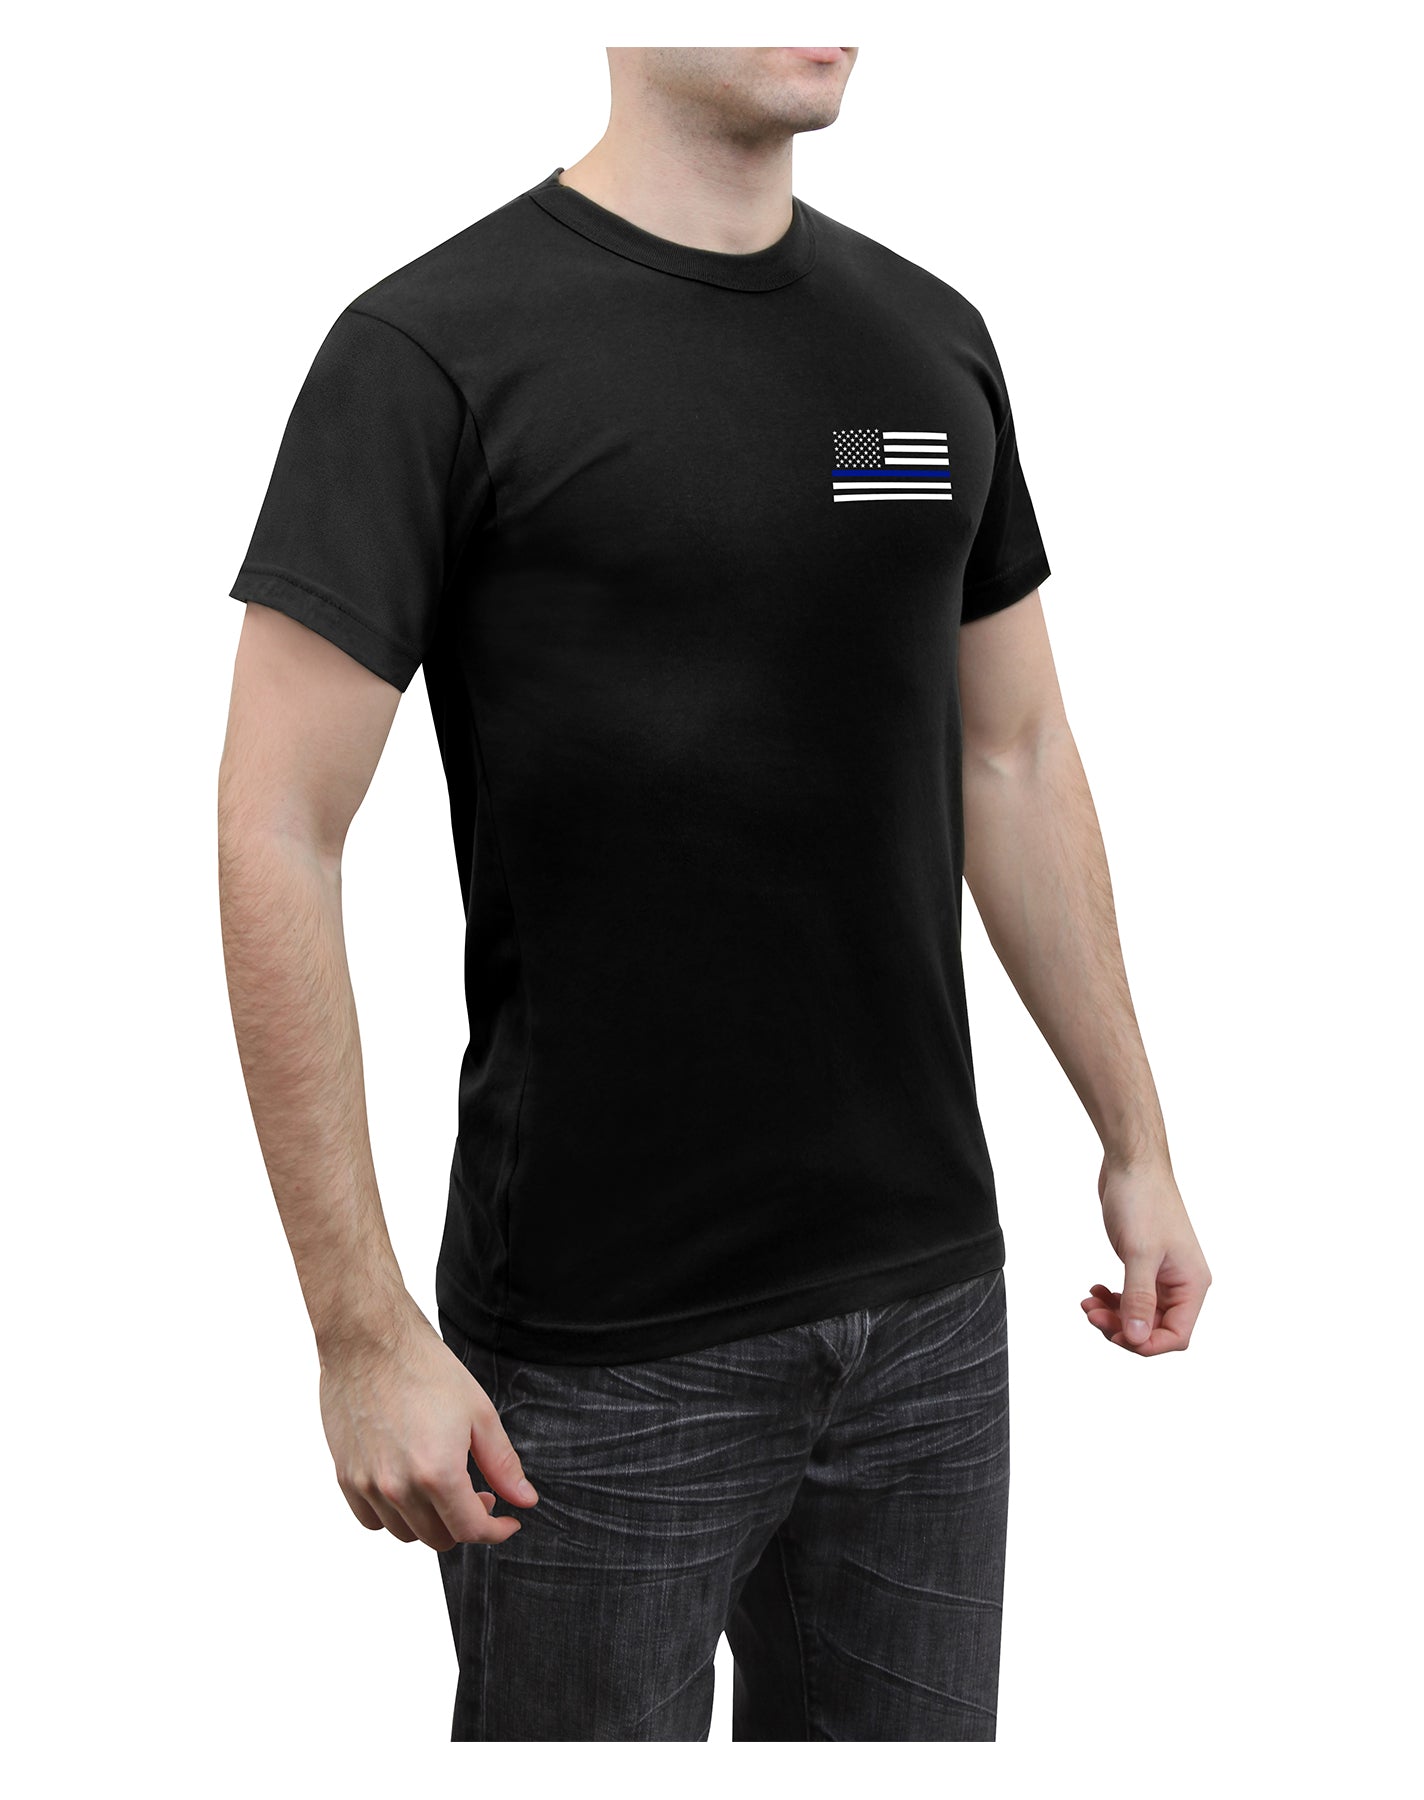 [Public Safety] Poly/Cotton Honor Respect Thin Blue Line T-Shirts